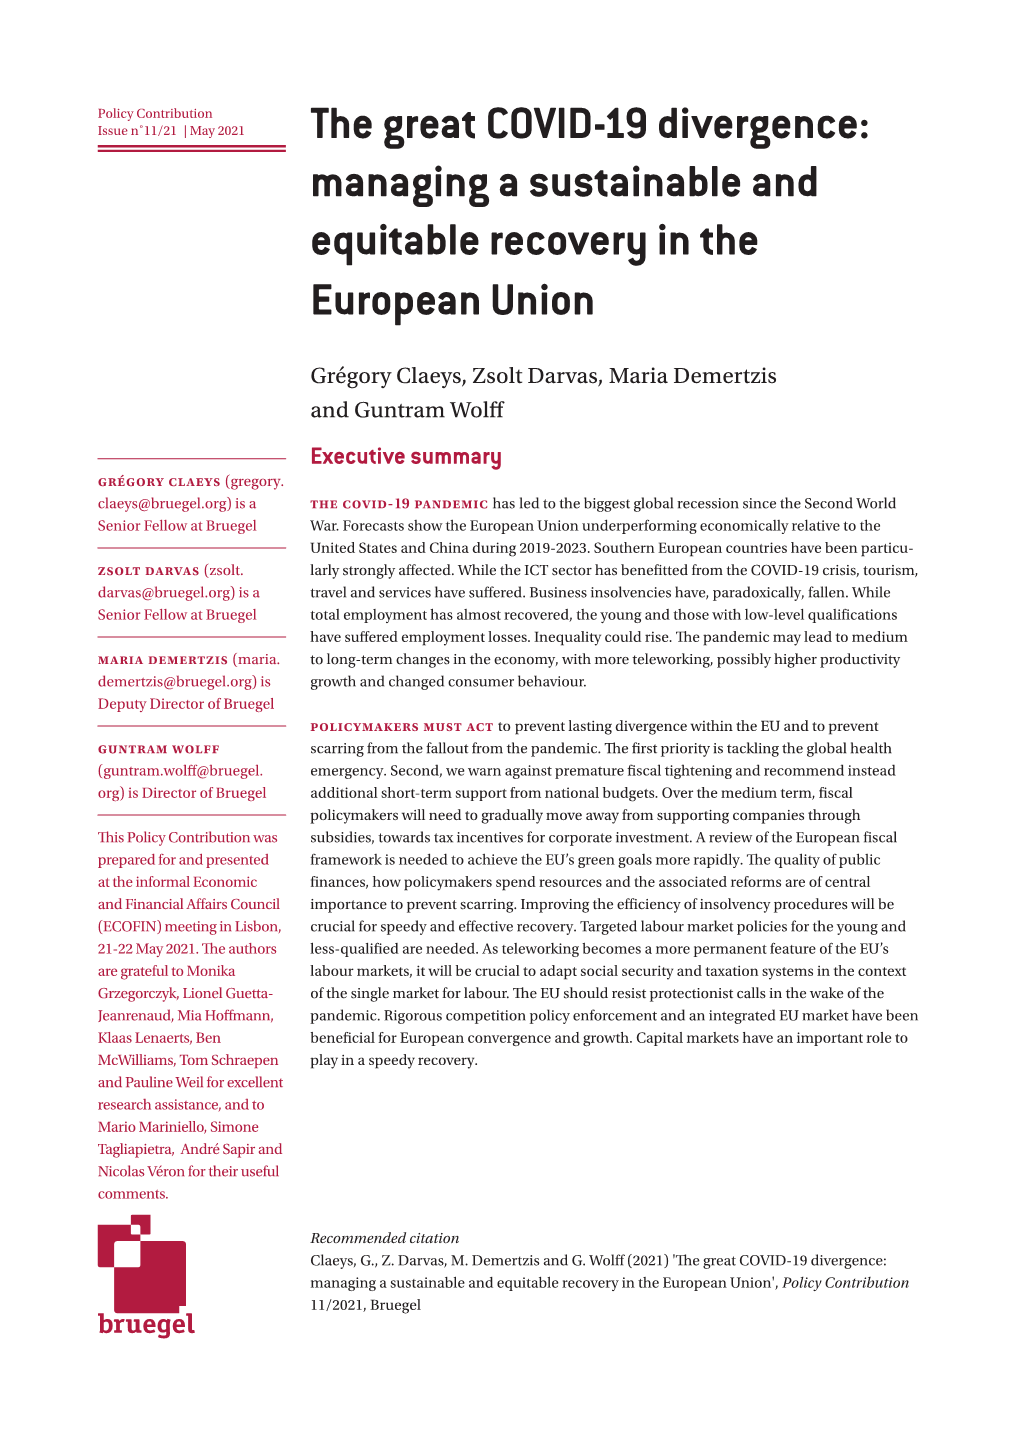 The Great COVID-19 Divergence: Managing a Sustainable and Equitable Recovery in the European Union